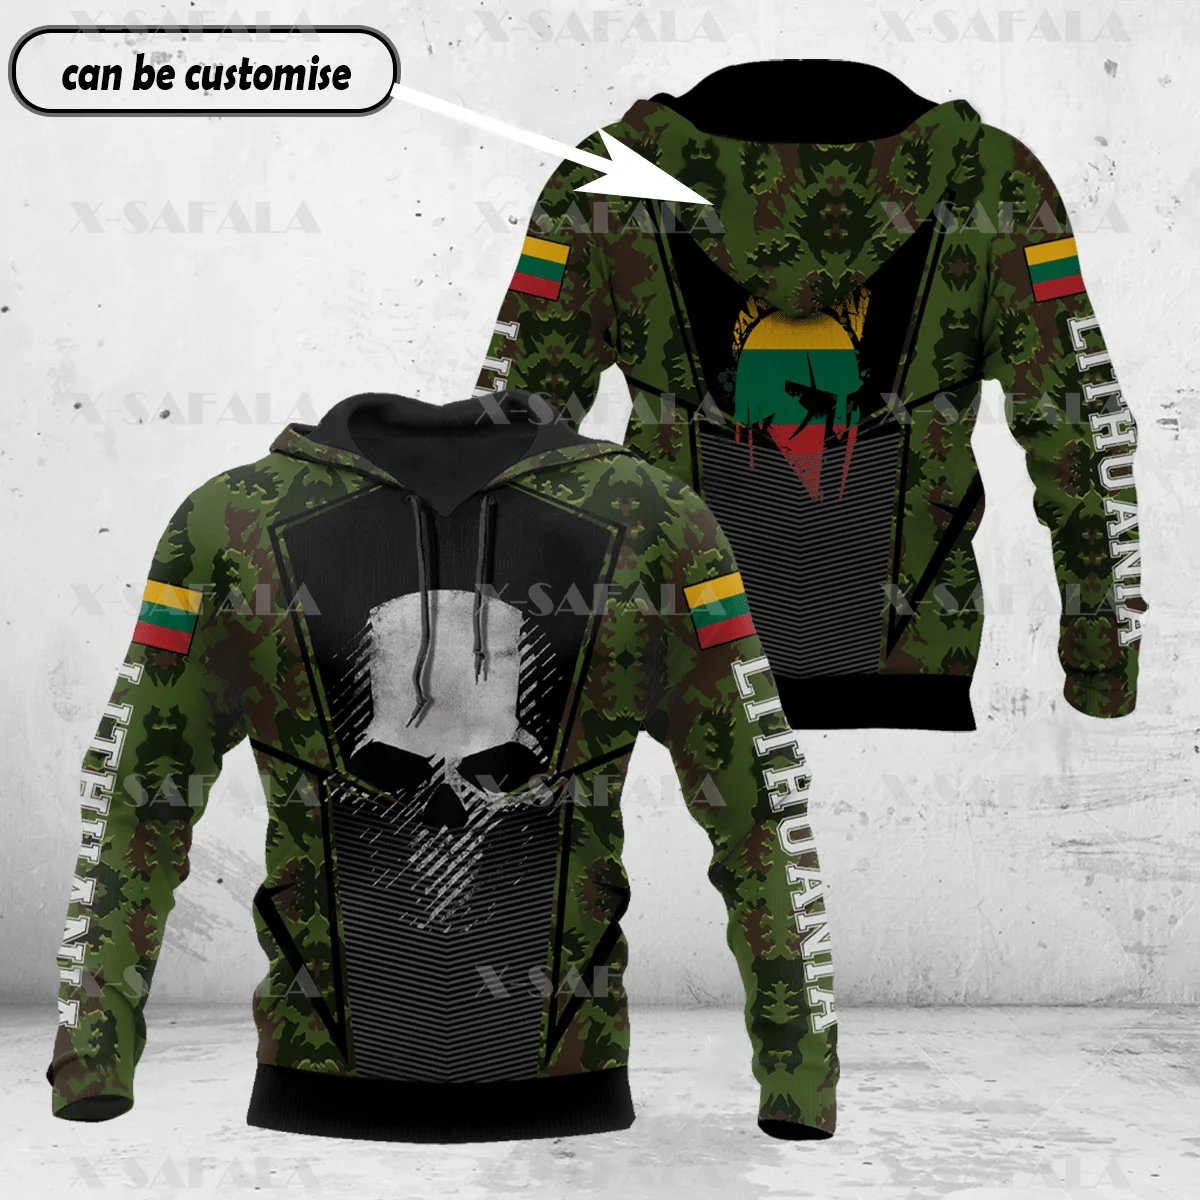 

LITHUANIA PROUD WITH COAT OF ARMS 3D Printed Hoodie Spring Autumn Man Women Harajuku Outwear Hooded Pullover Tracksuits Casual-5